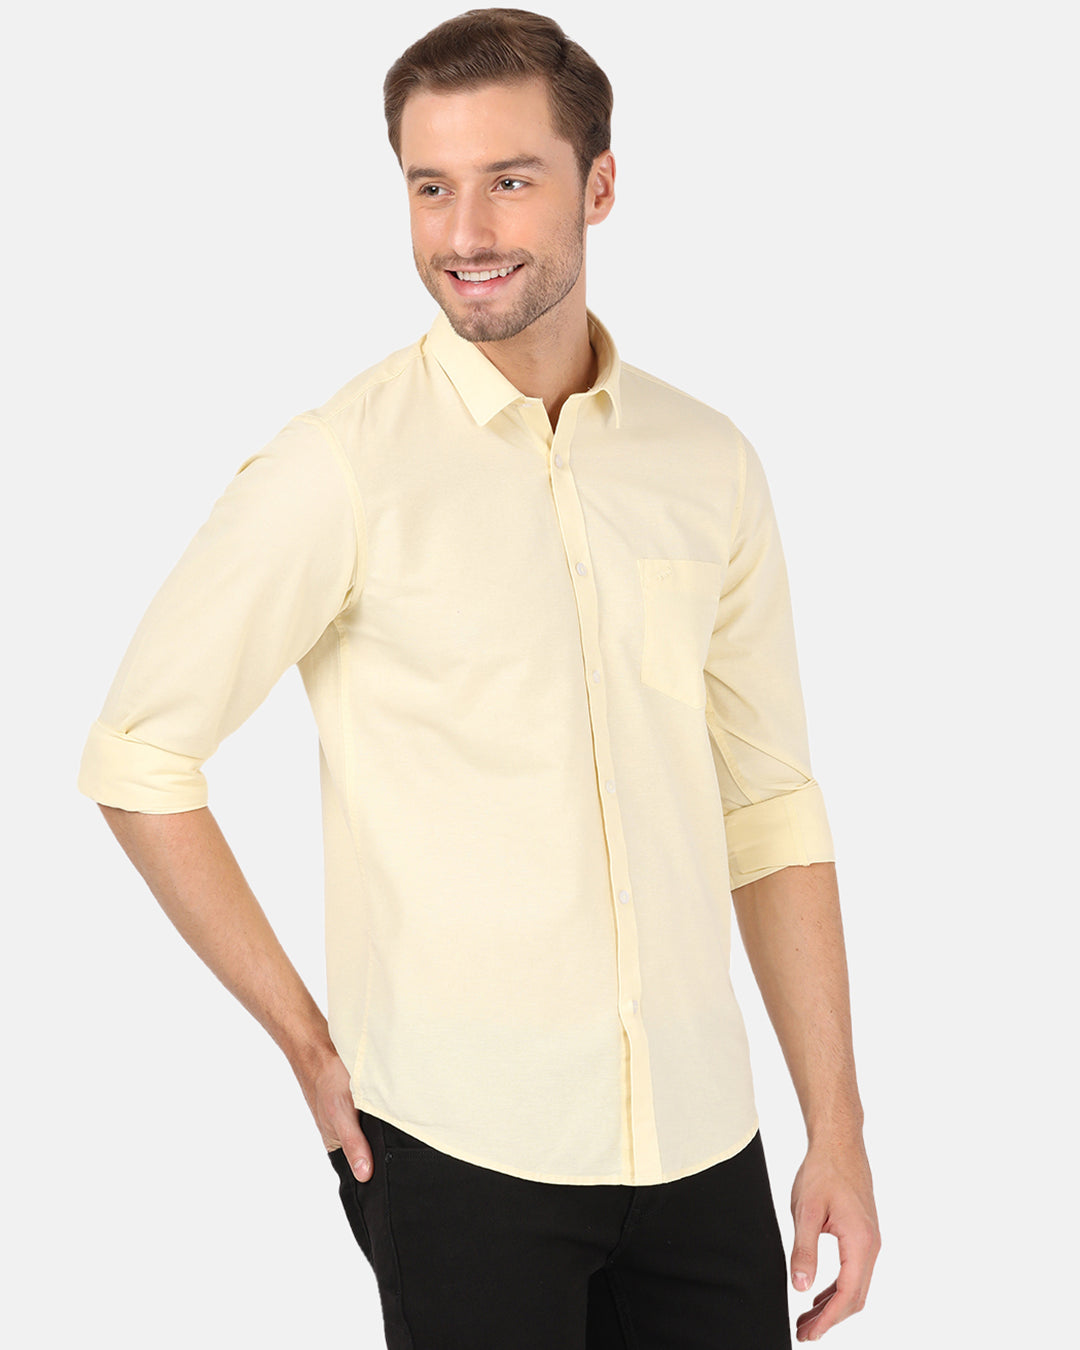 Crocodile Casual Full Sleeve Slim Fit Solid Yellow Shirt for Men